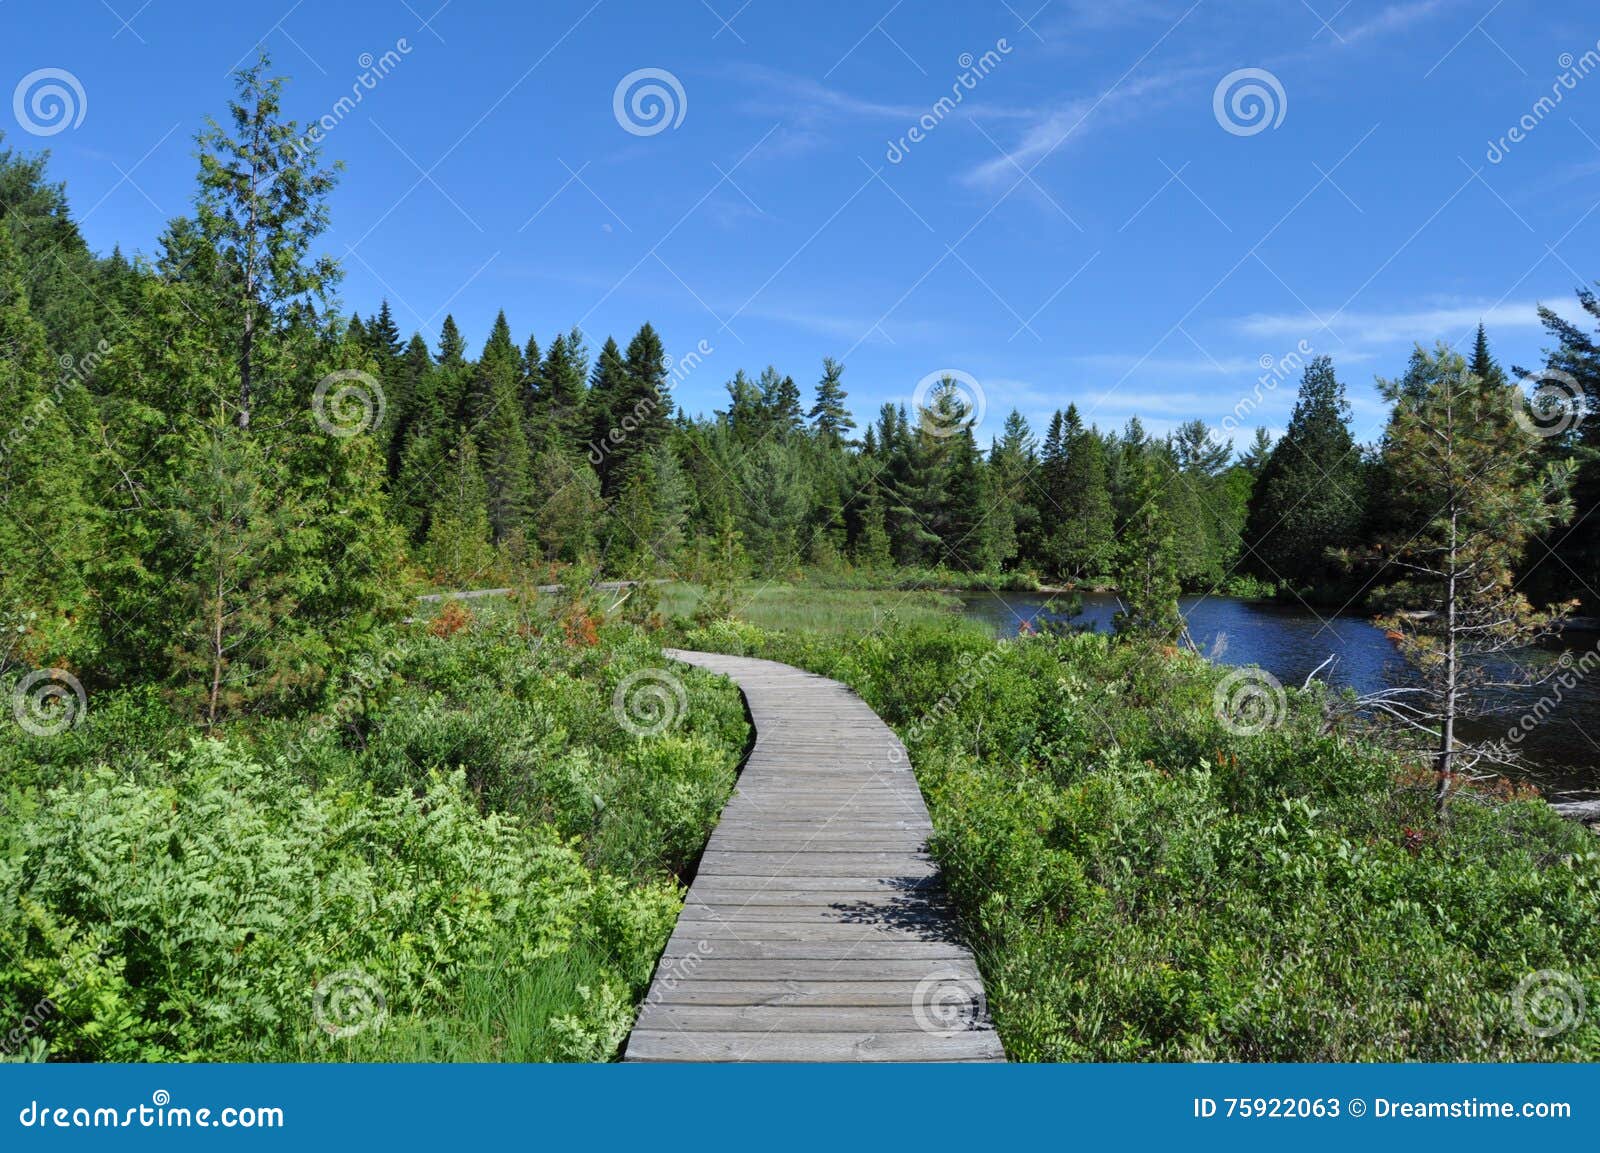 wooden path across the lake